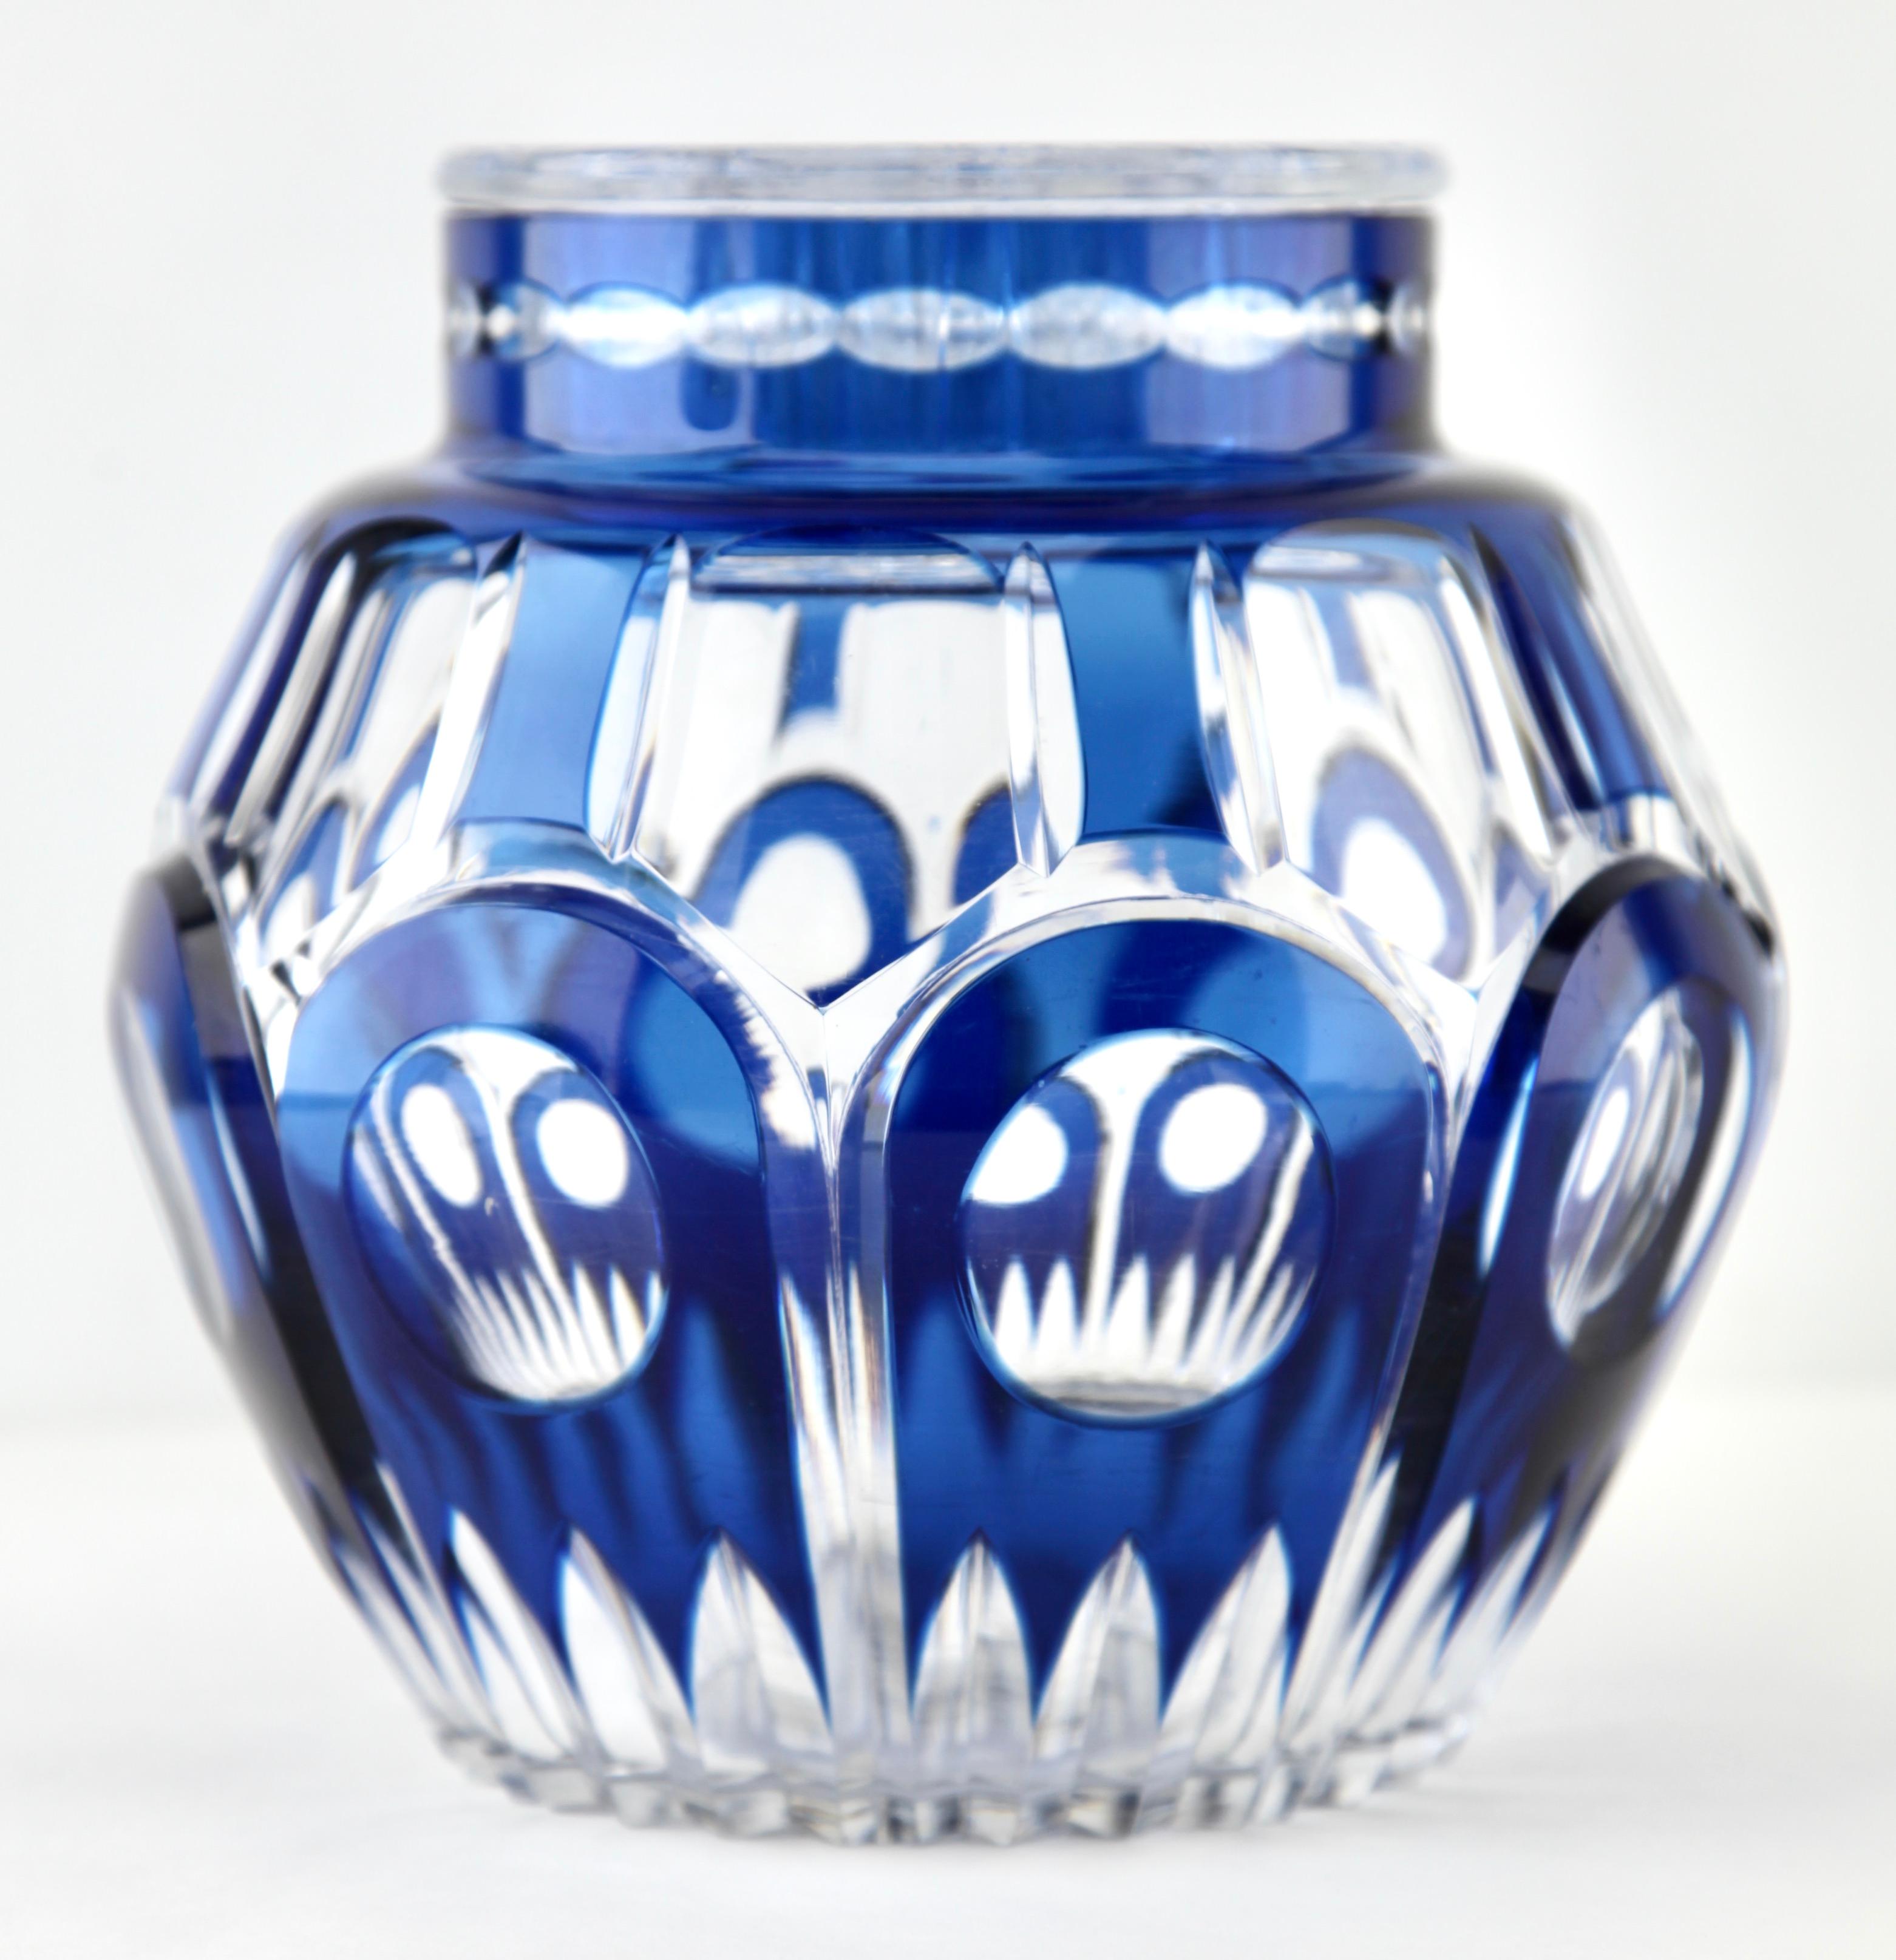 Large vibrant, Cobalt Bleu cased-crystal glass 'Pique Fleurs' vase with a cut-to-clear Art Deco decoration 
This design for vases is often called 'Pique fleurs' or 'rose-bowl' and is supplied with a fitted crystal grille to support stems in an